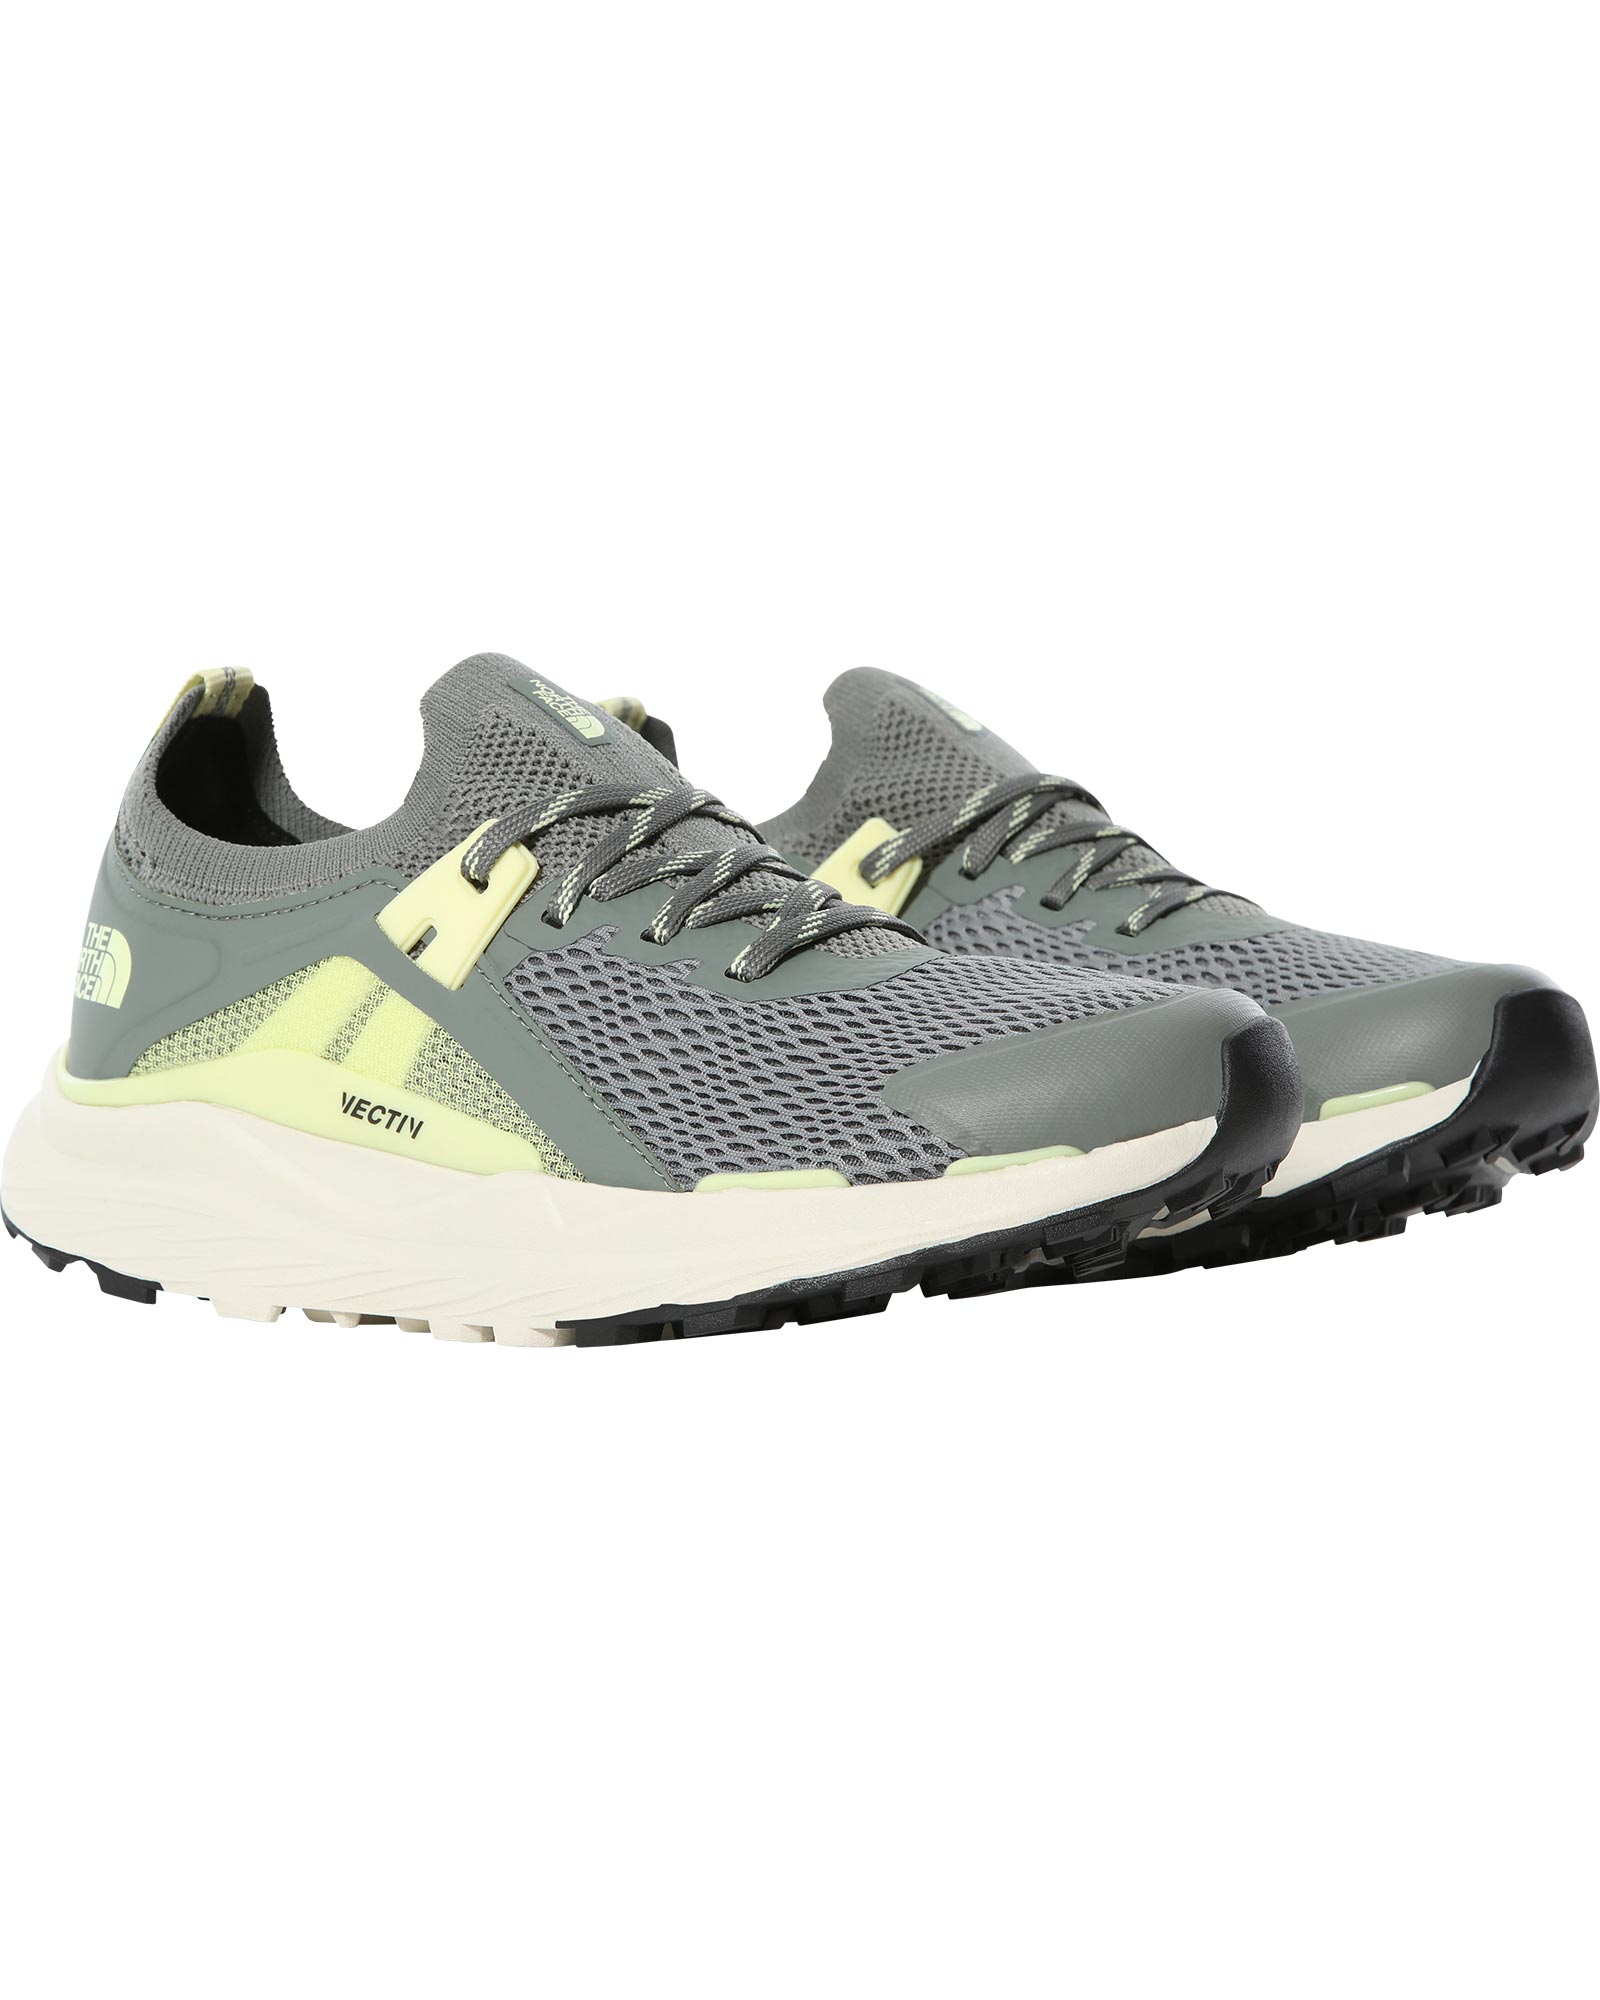 The North Face Vectiv Hypnum Women’s Shoes - Agave Green/Pale Lime Yellow UK 4